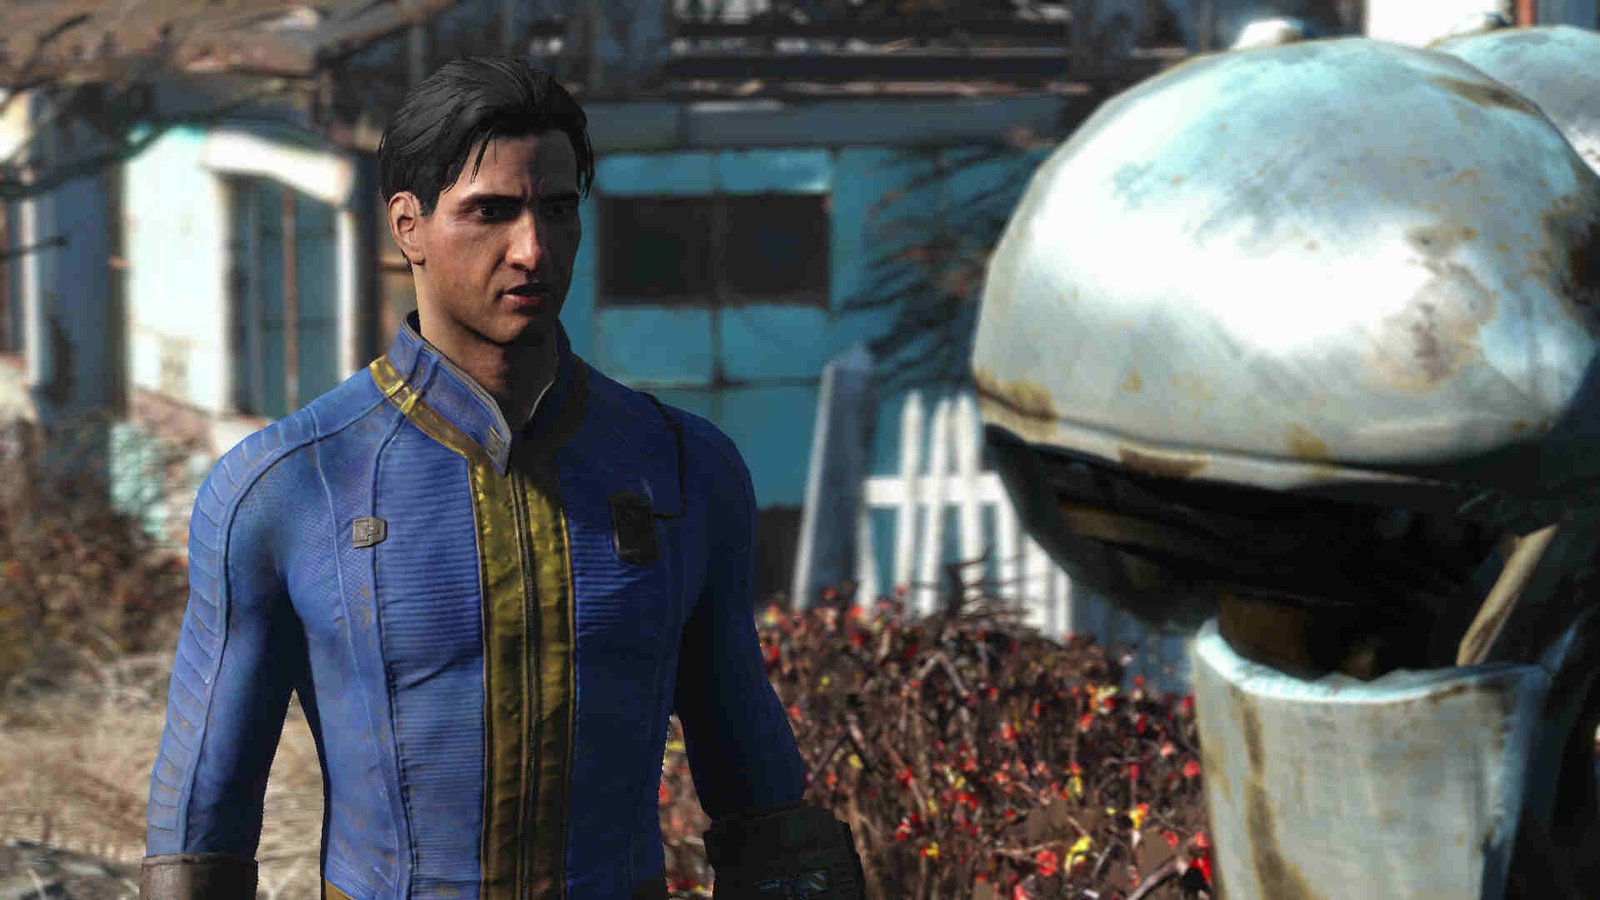 Fallout 4 crashing on Steam Deck: How to fix it